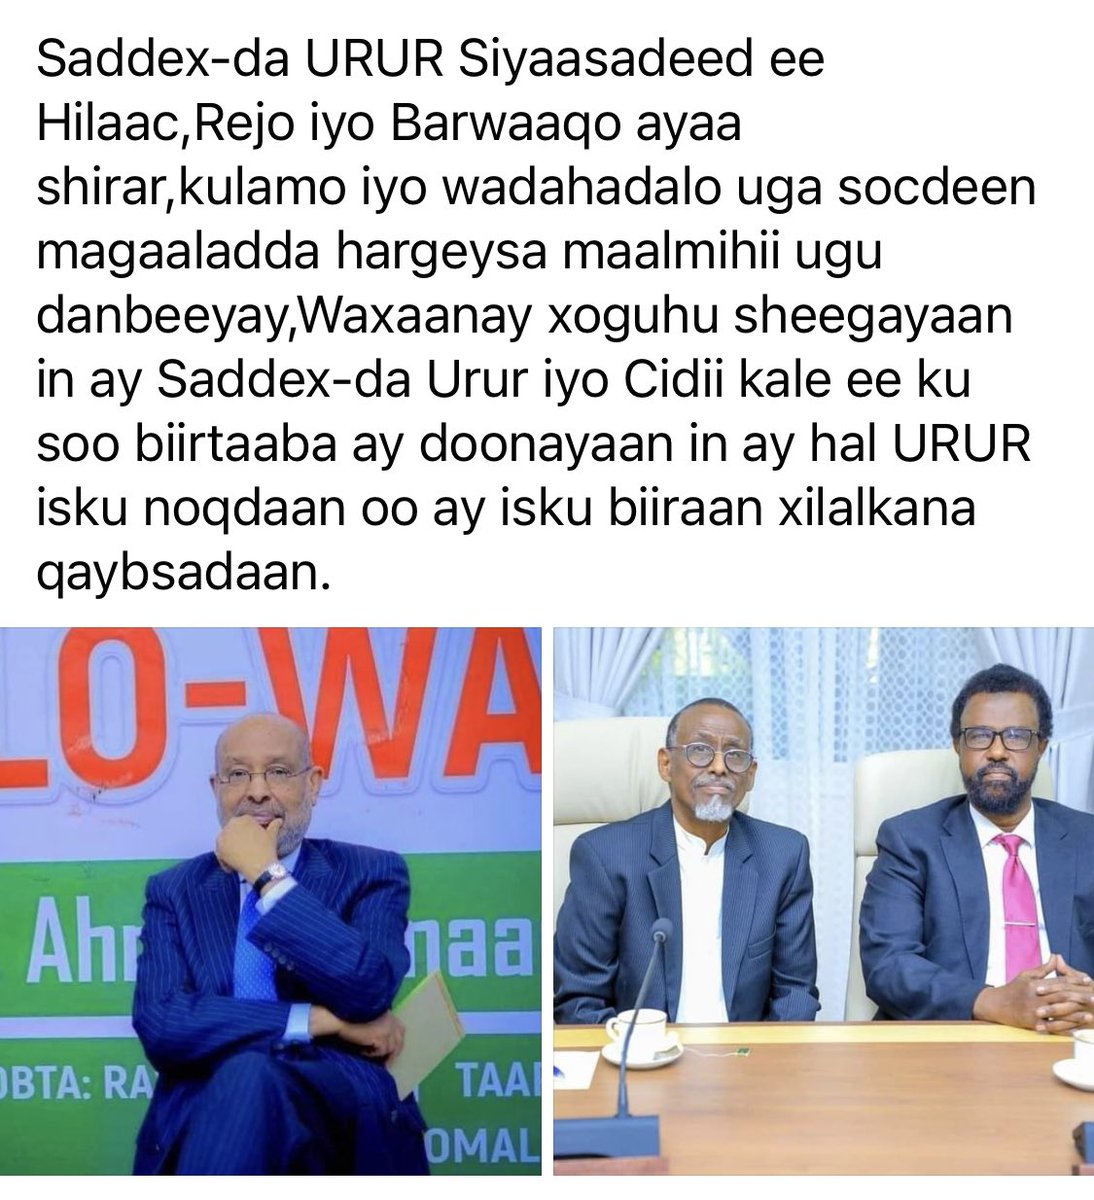 If Rejo, Hilaac, and Barwaaqo political associations unite, they will form an unstoppable force to transition into a political party for the November election.